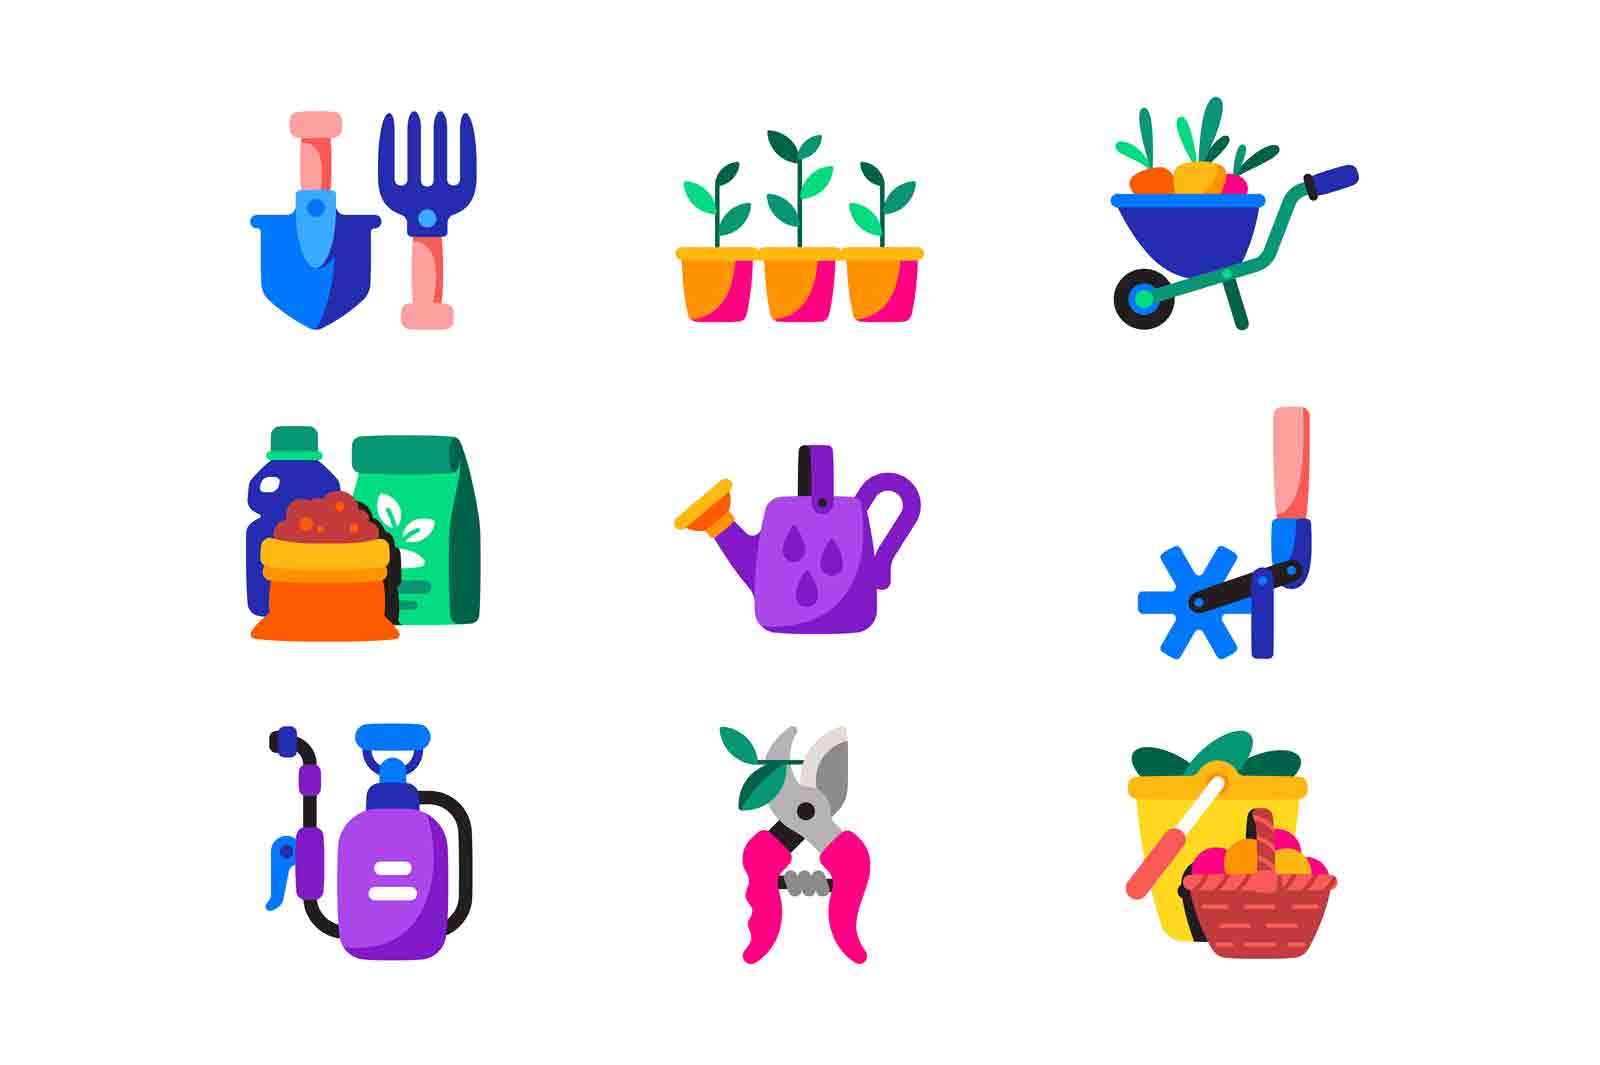 Gardening or horticulture icons set vector illustration. Tools and equipment for growing plant in garden flat style concept